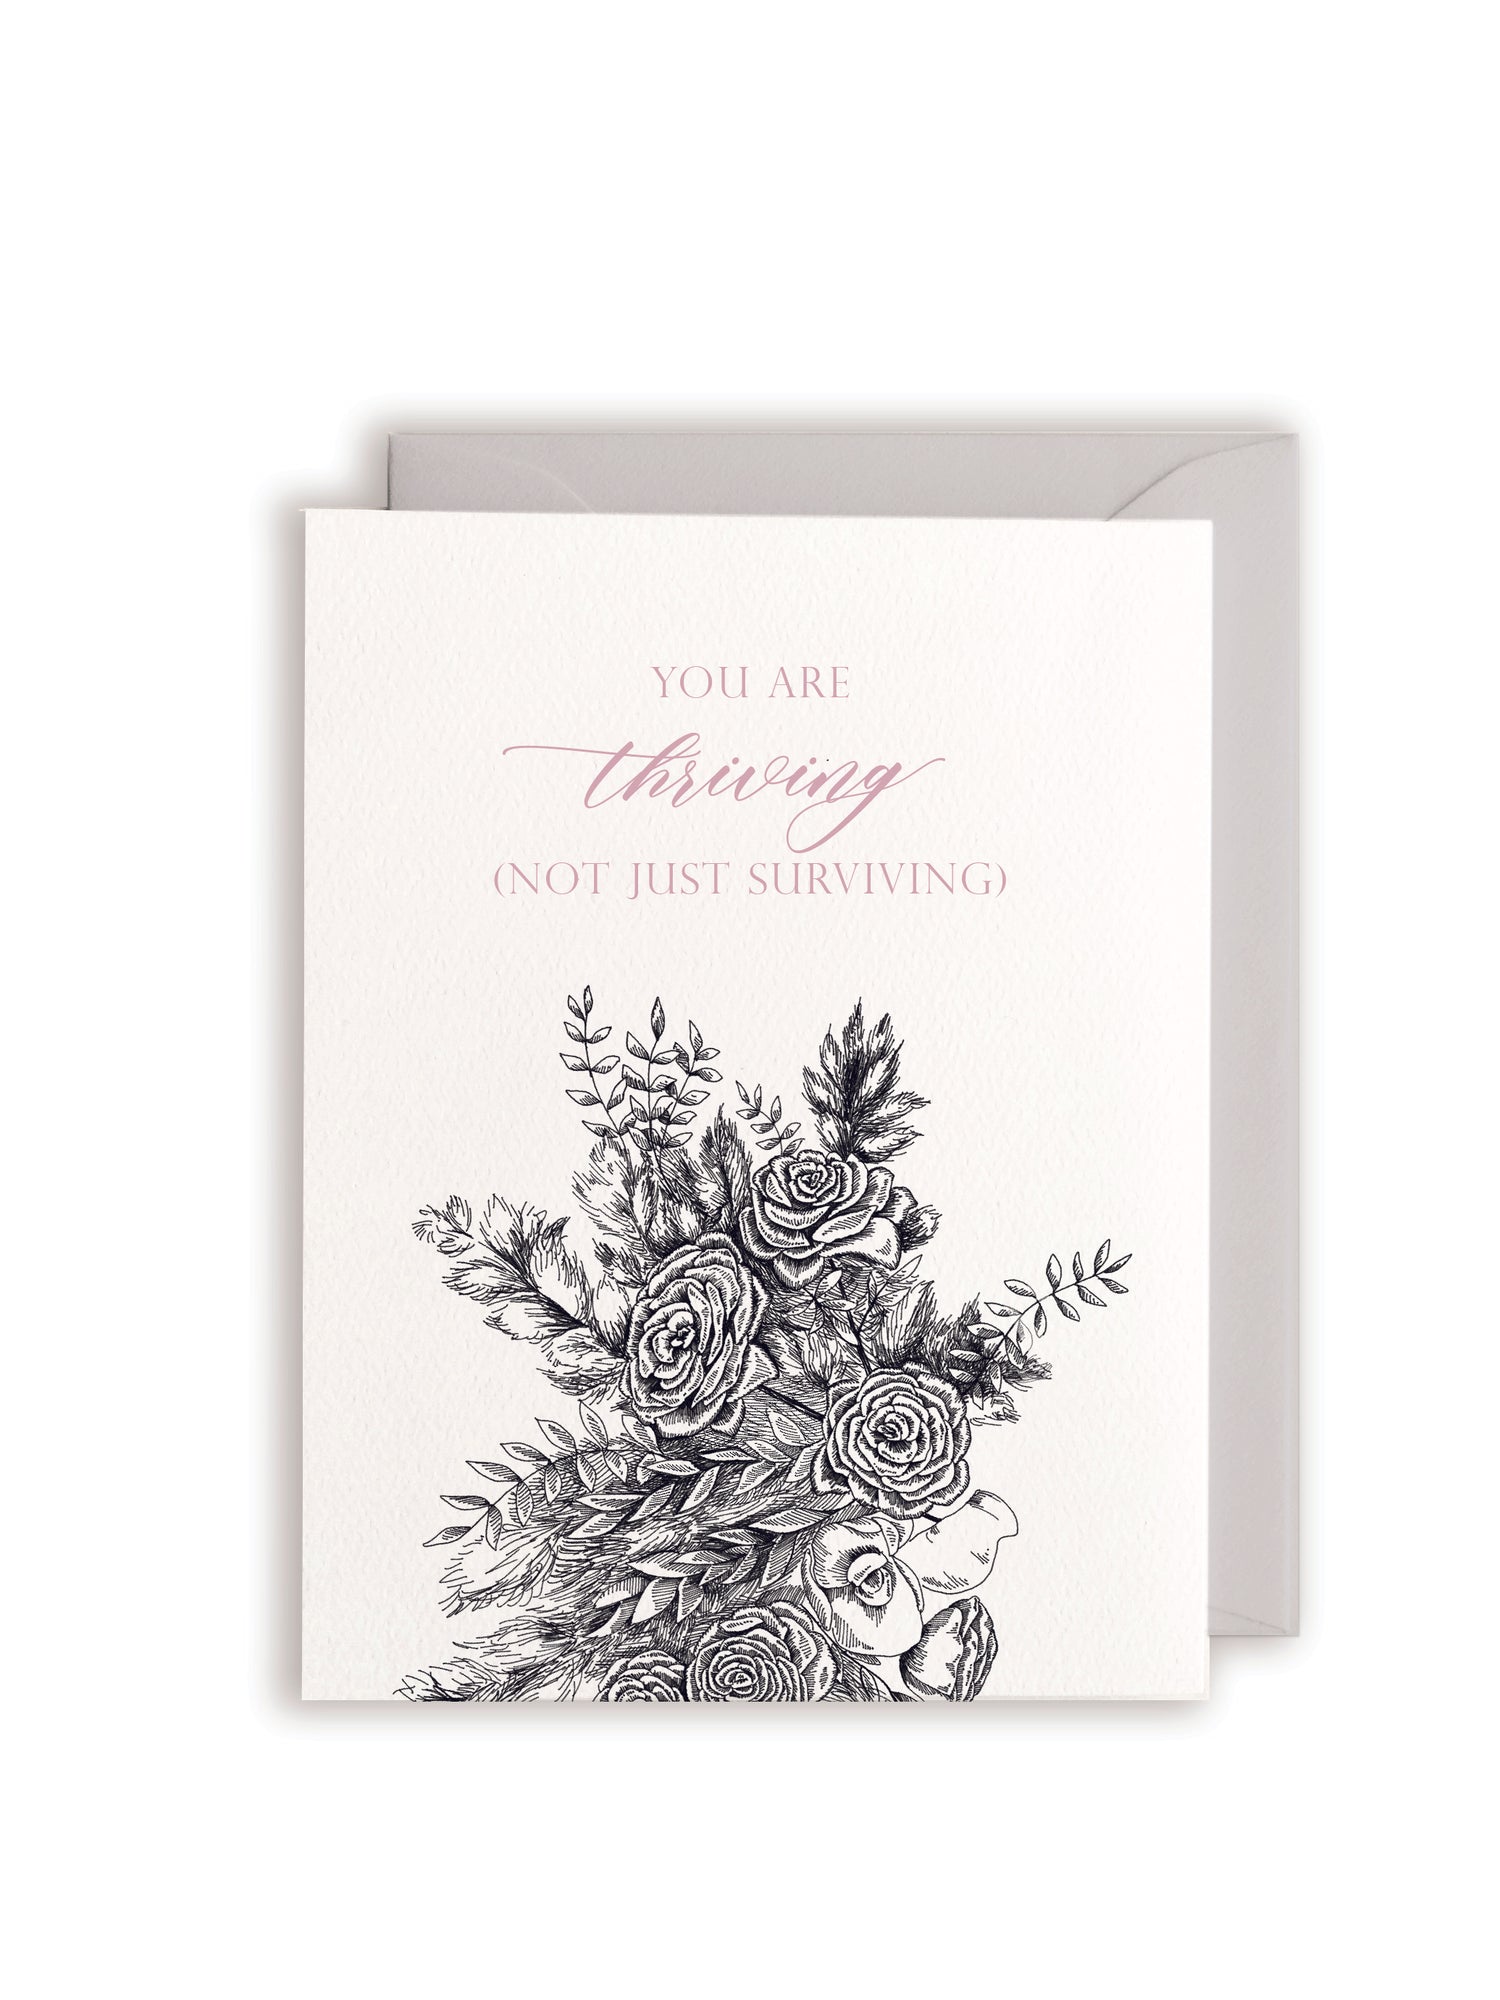 Letterpress friendship card with florals that says "you are thriving (not just surviving)" by Rust Belt Love